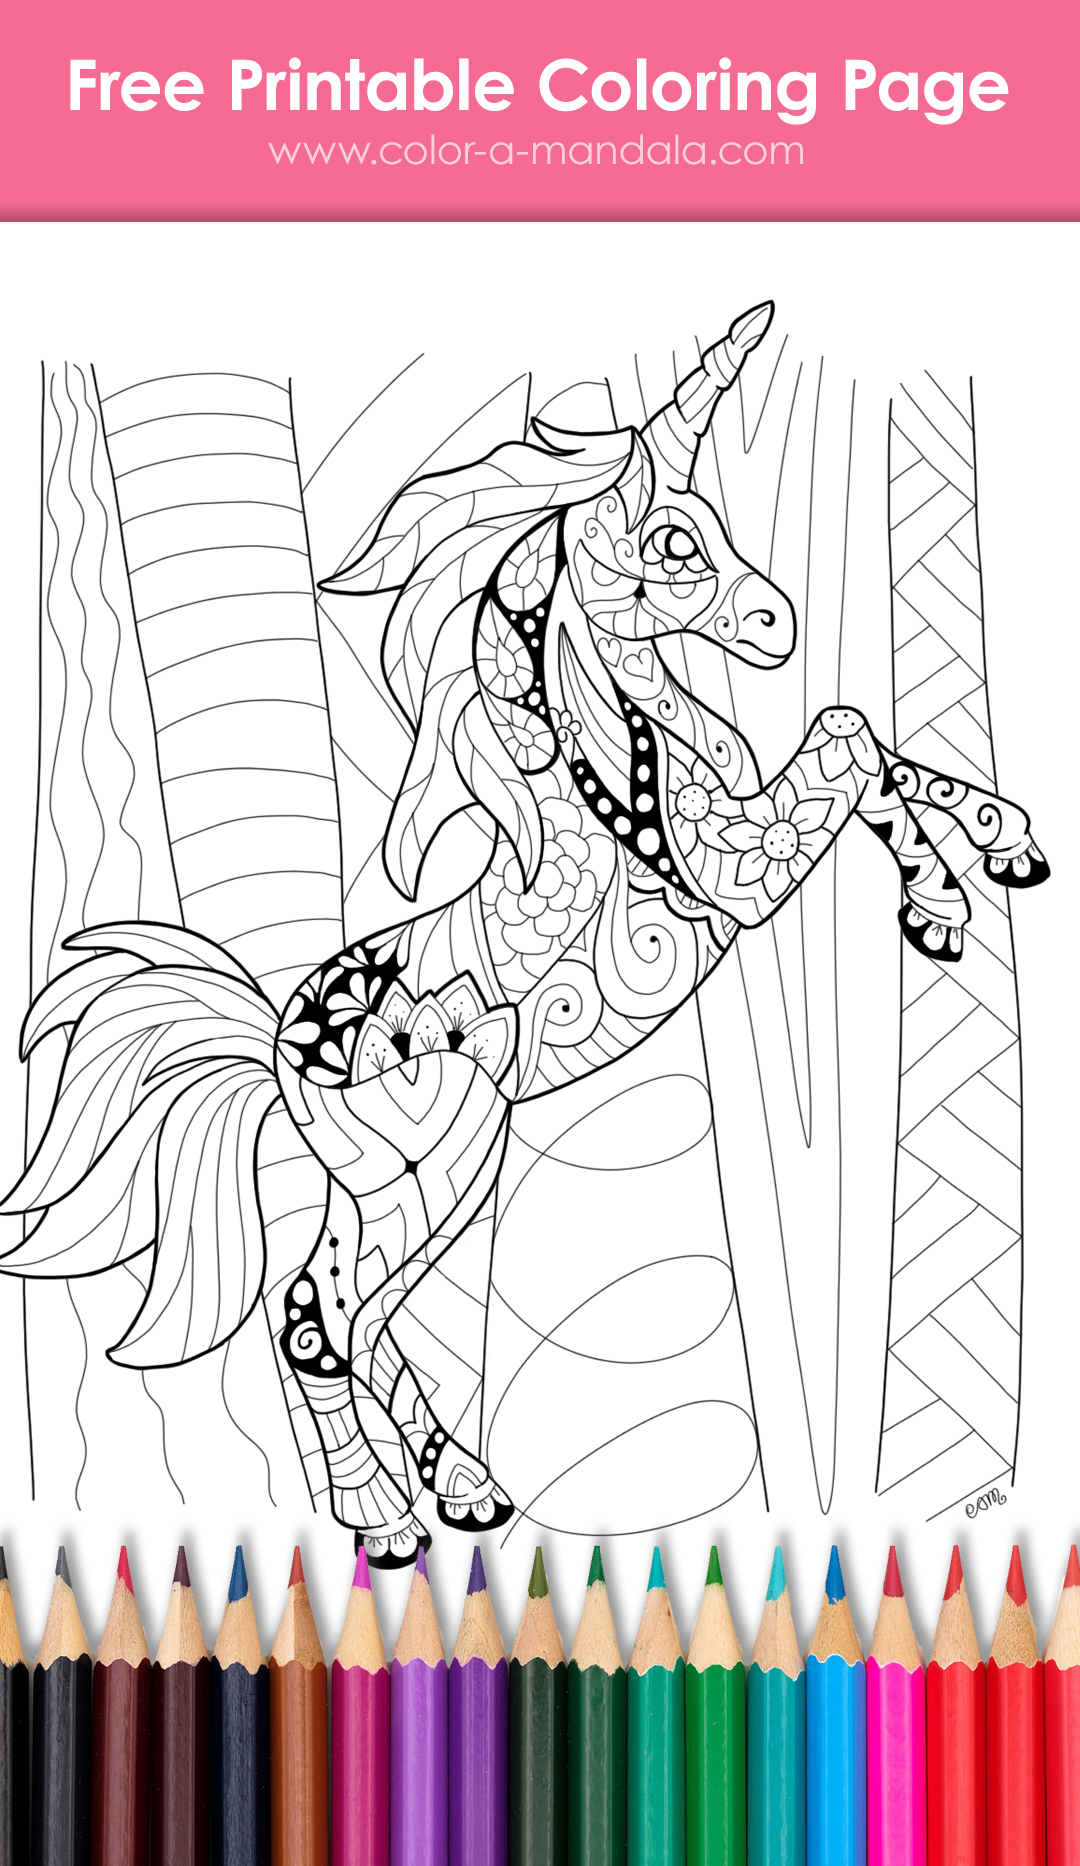 Image of a unicorn coloring page that is decorated with doodle art and mandala designs.